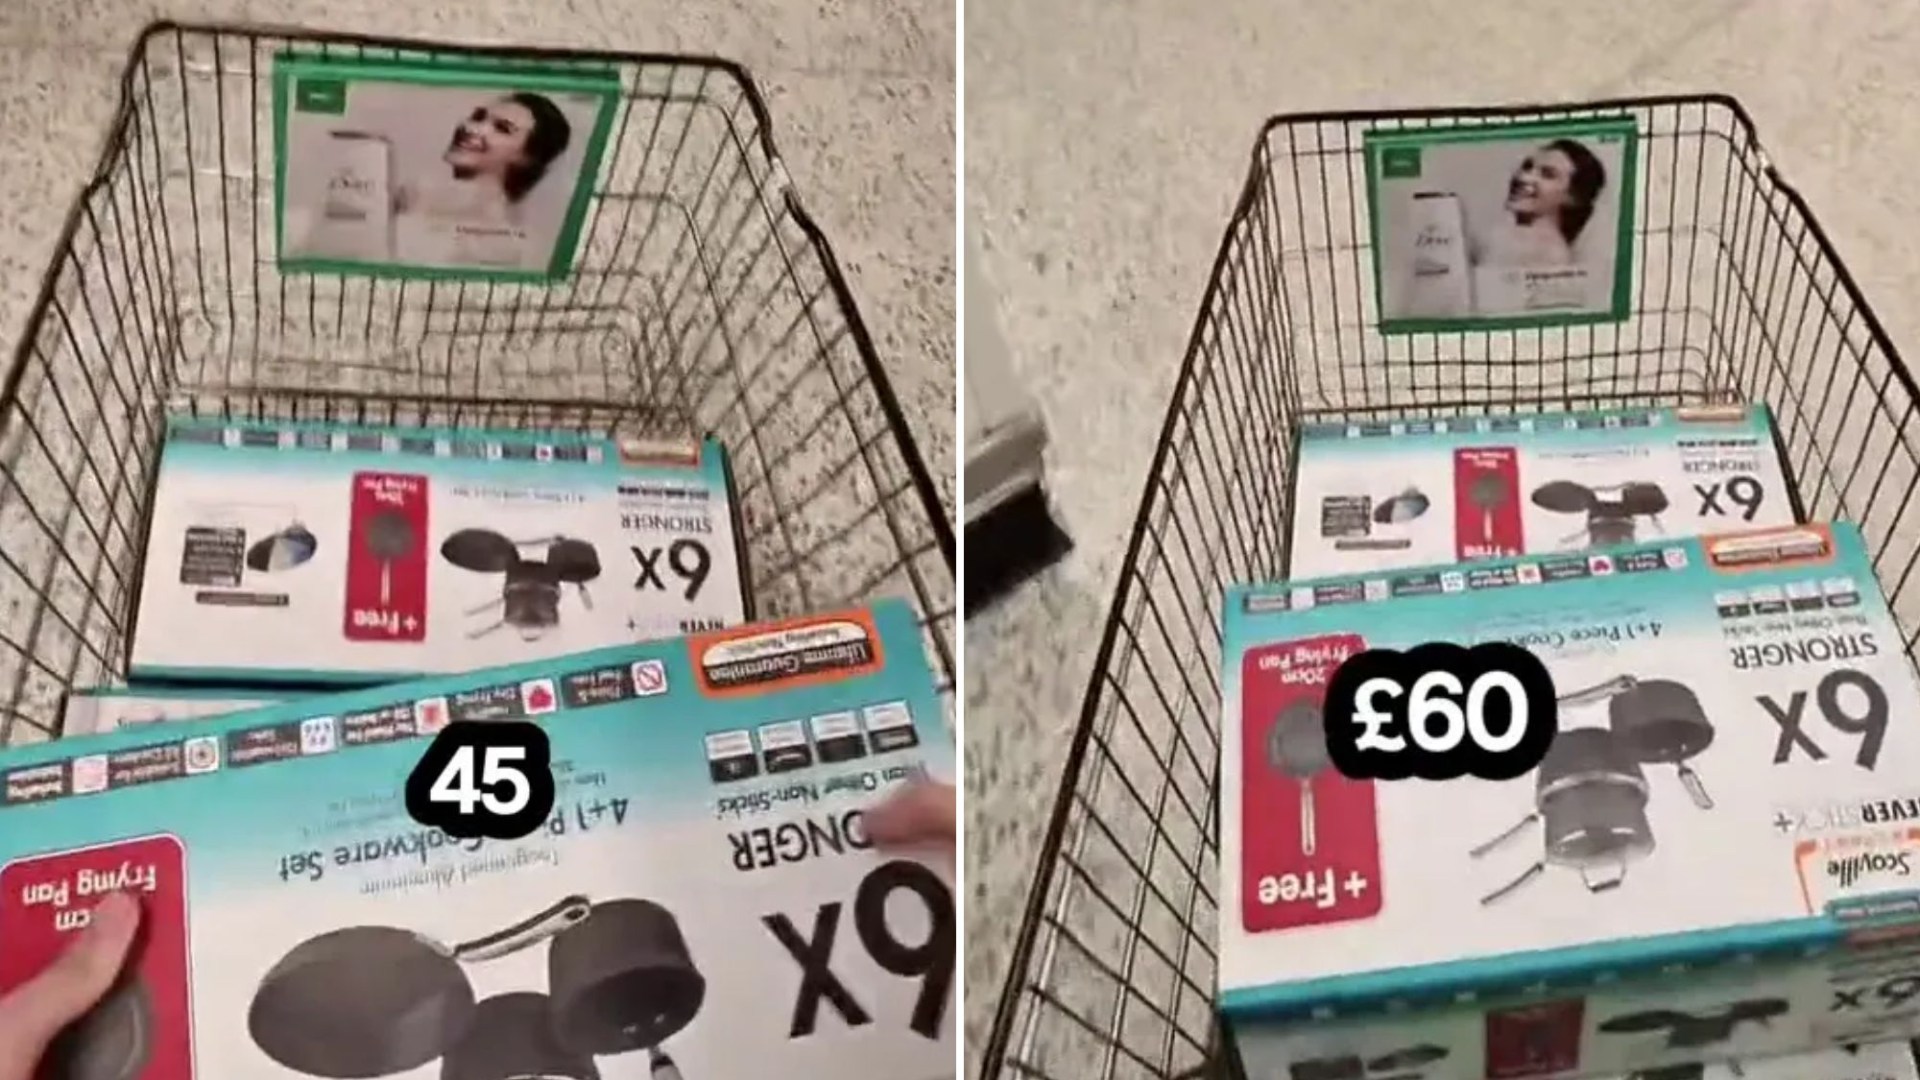 None left for those struggling people cry as man brags about clearing Asda shelves so he can pocket 40 profit an hour [Video]